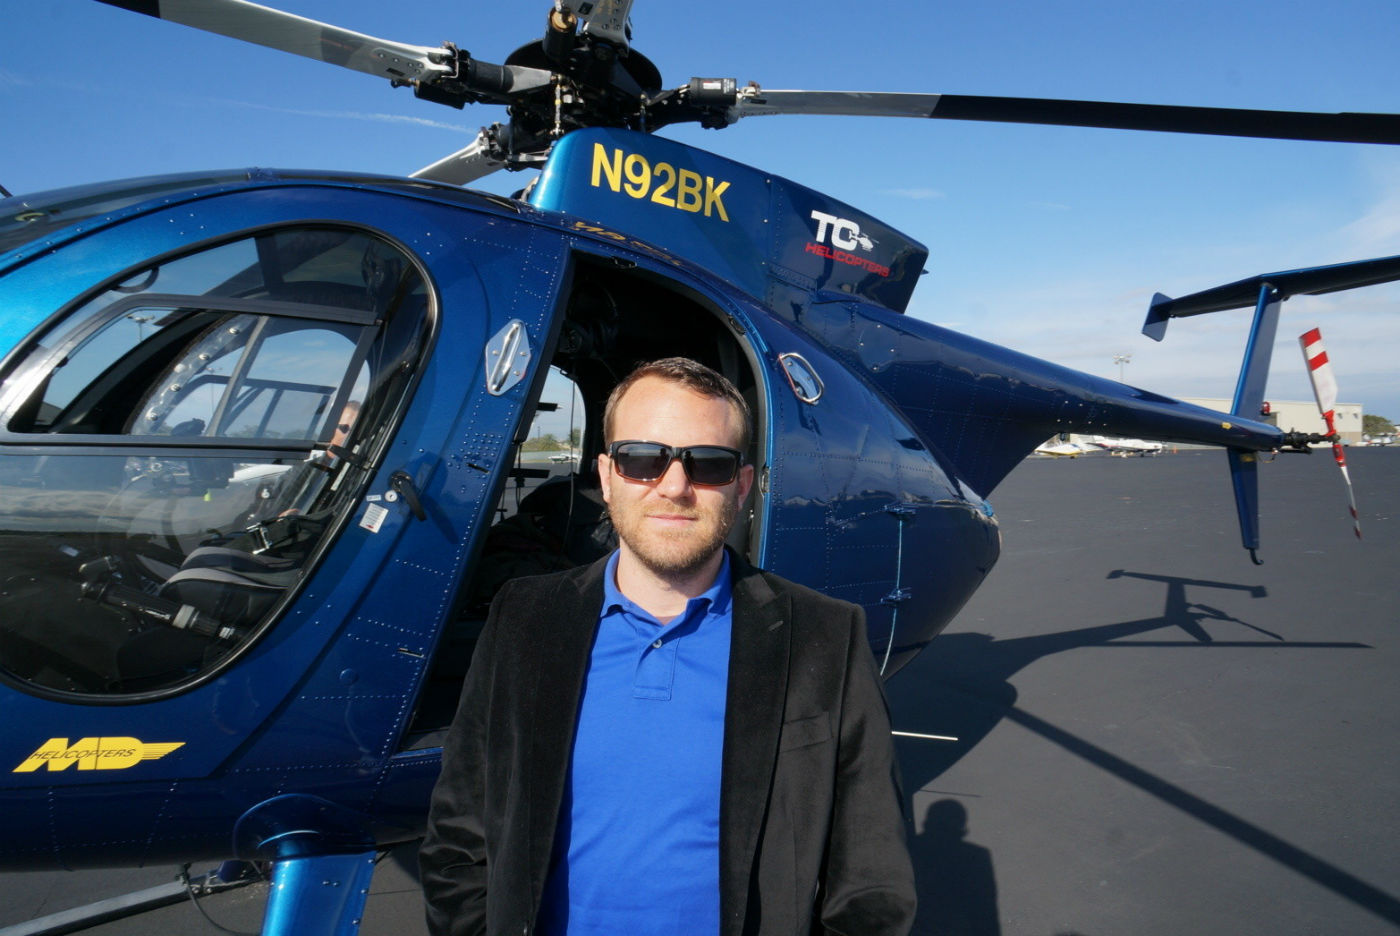 Mike Blackton, president of Chopper, has ambitious plans to expand his company's operations. Chopper Photo